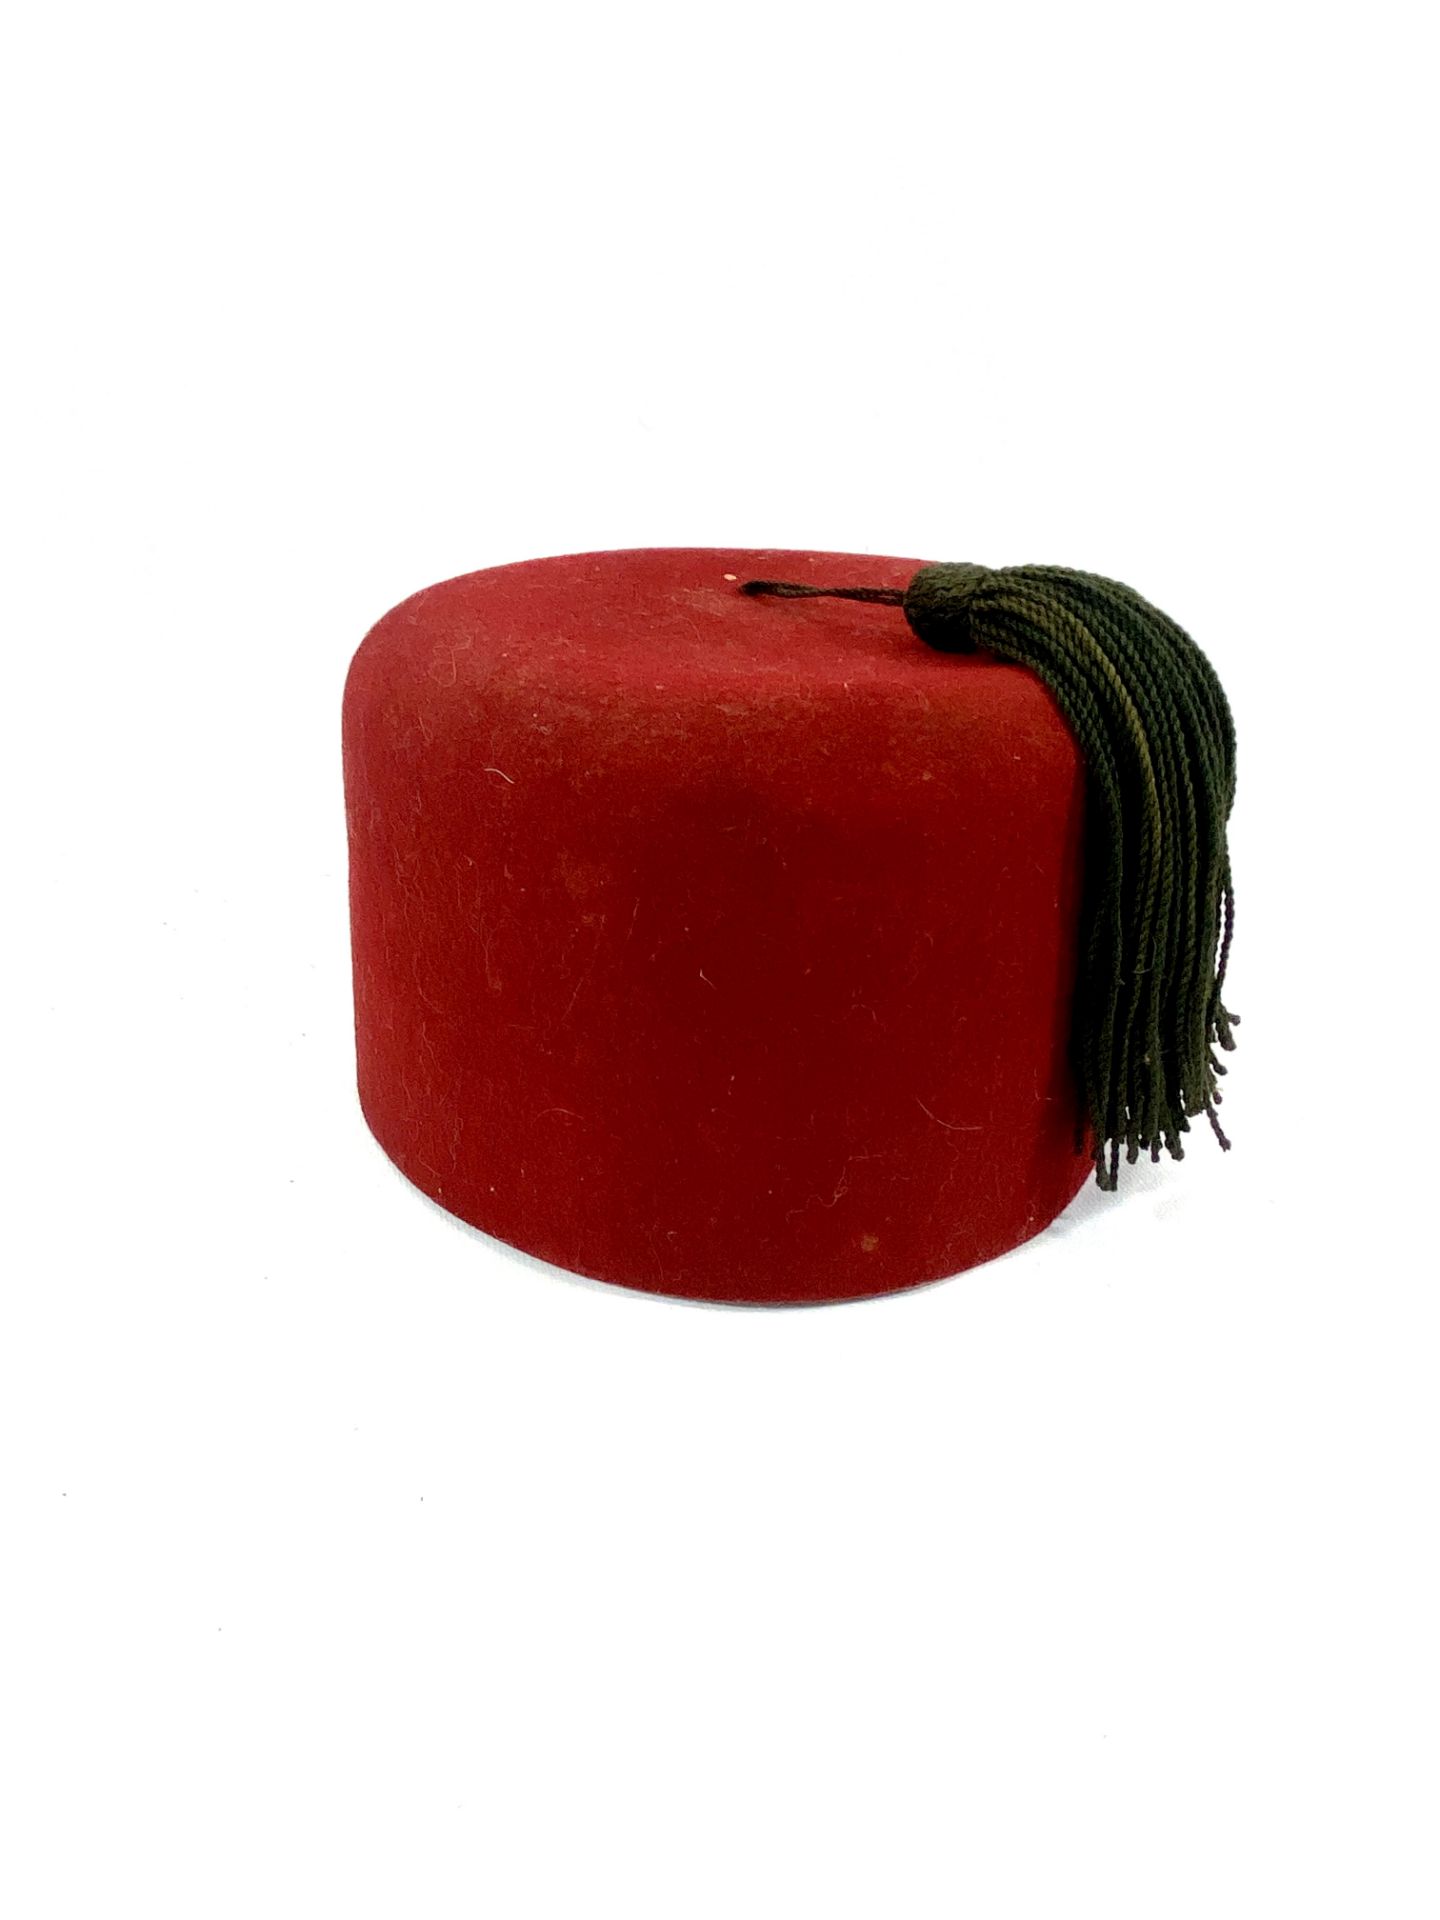 War Department fez, as given by Tommy Cooper - Image 5 of 16